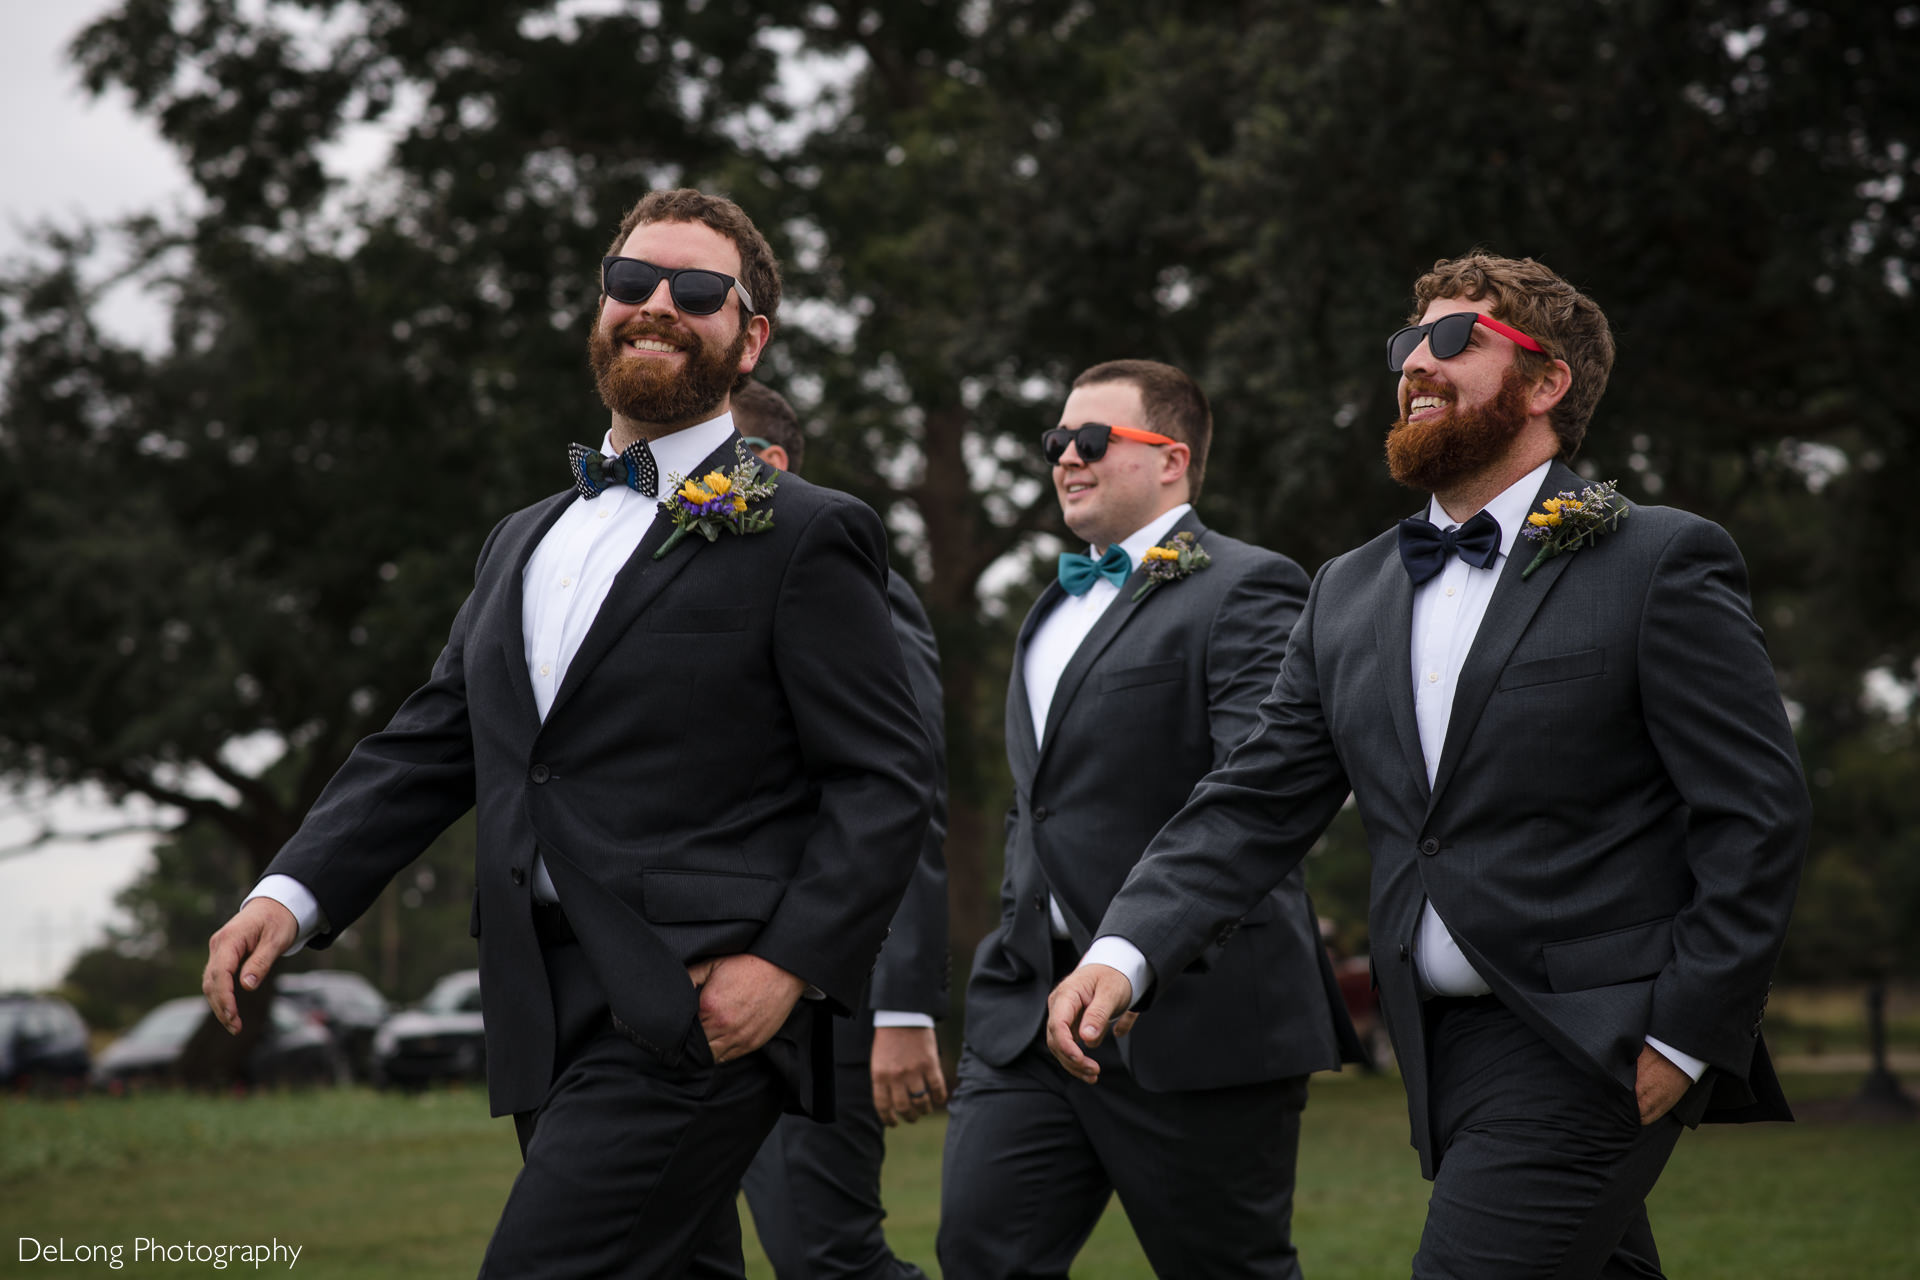 Groom and groomsmen doing a funny ceremony entrance by walking out wearing sunglasses at the Island House in Charleston, SC by Charlotte Wedding Photographers DeLong Photography